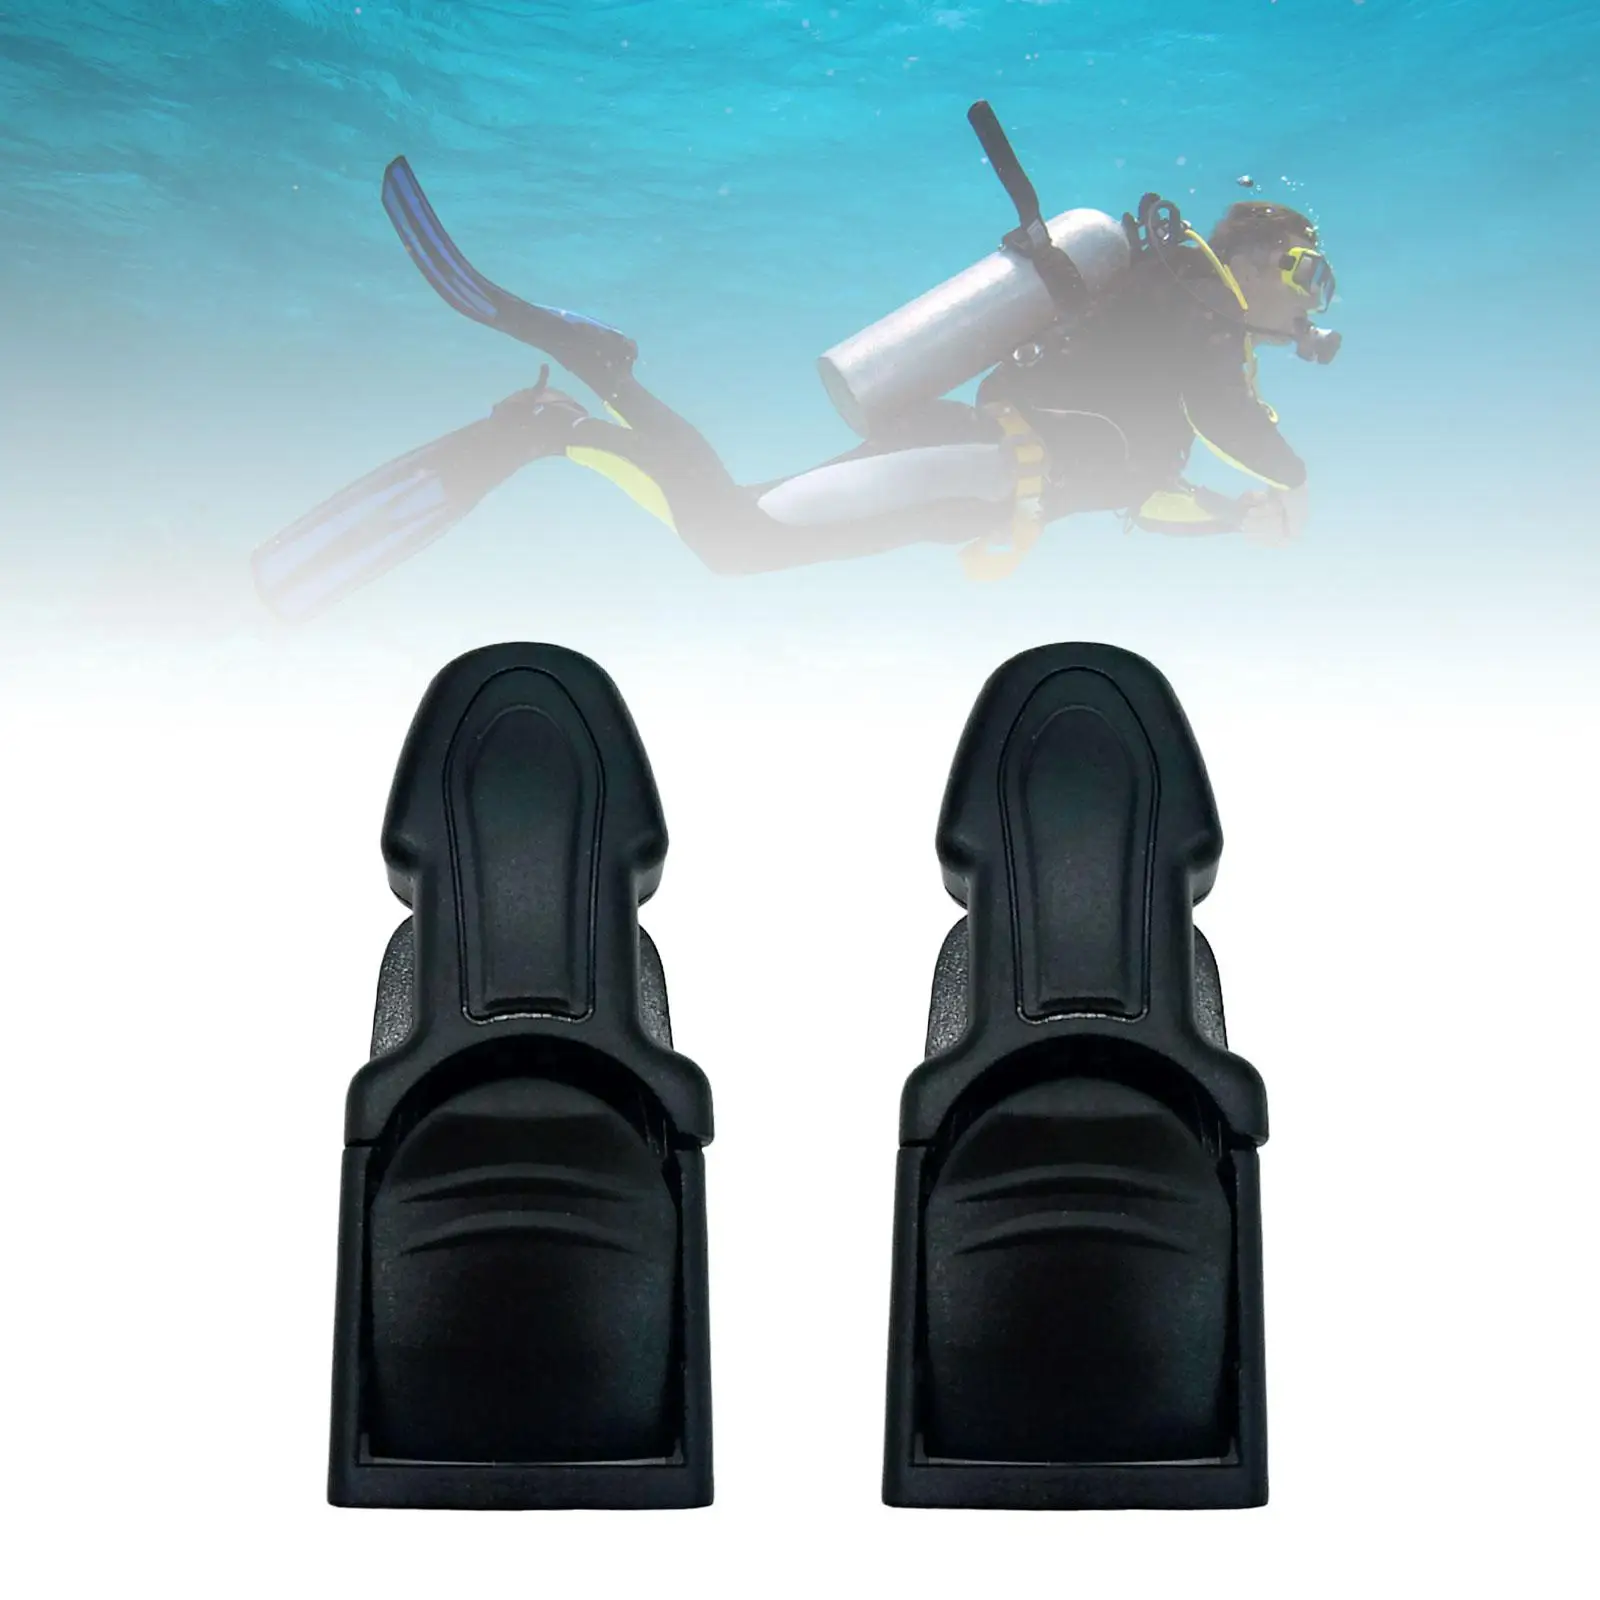 2Pcs Diving Fin Strap Buckles Adjustable Dive Fin Flippers Strap Quick Release Buckle for Scuba Diving Freediving Snorkeling